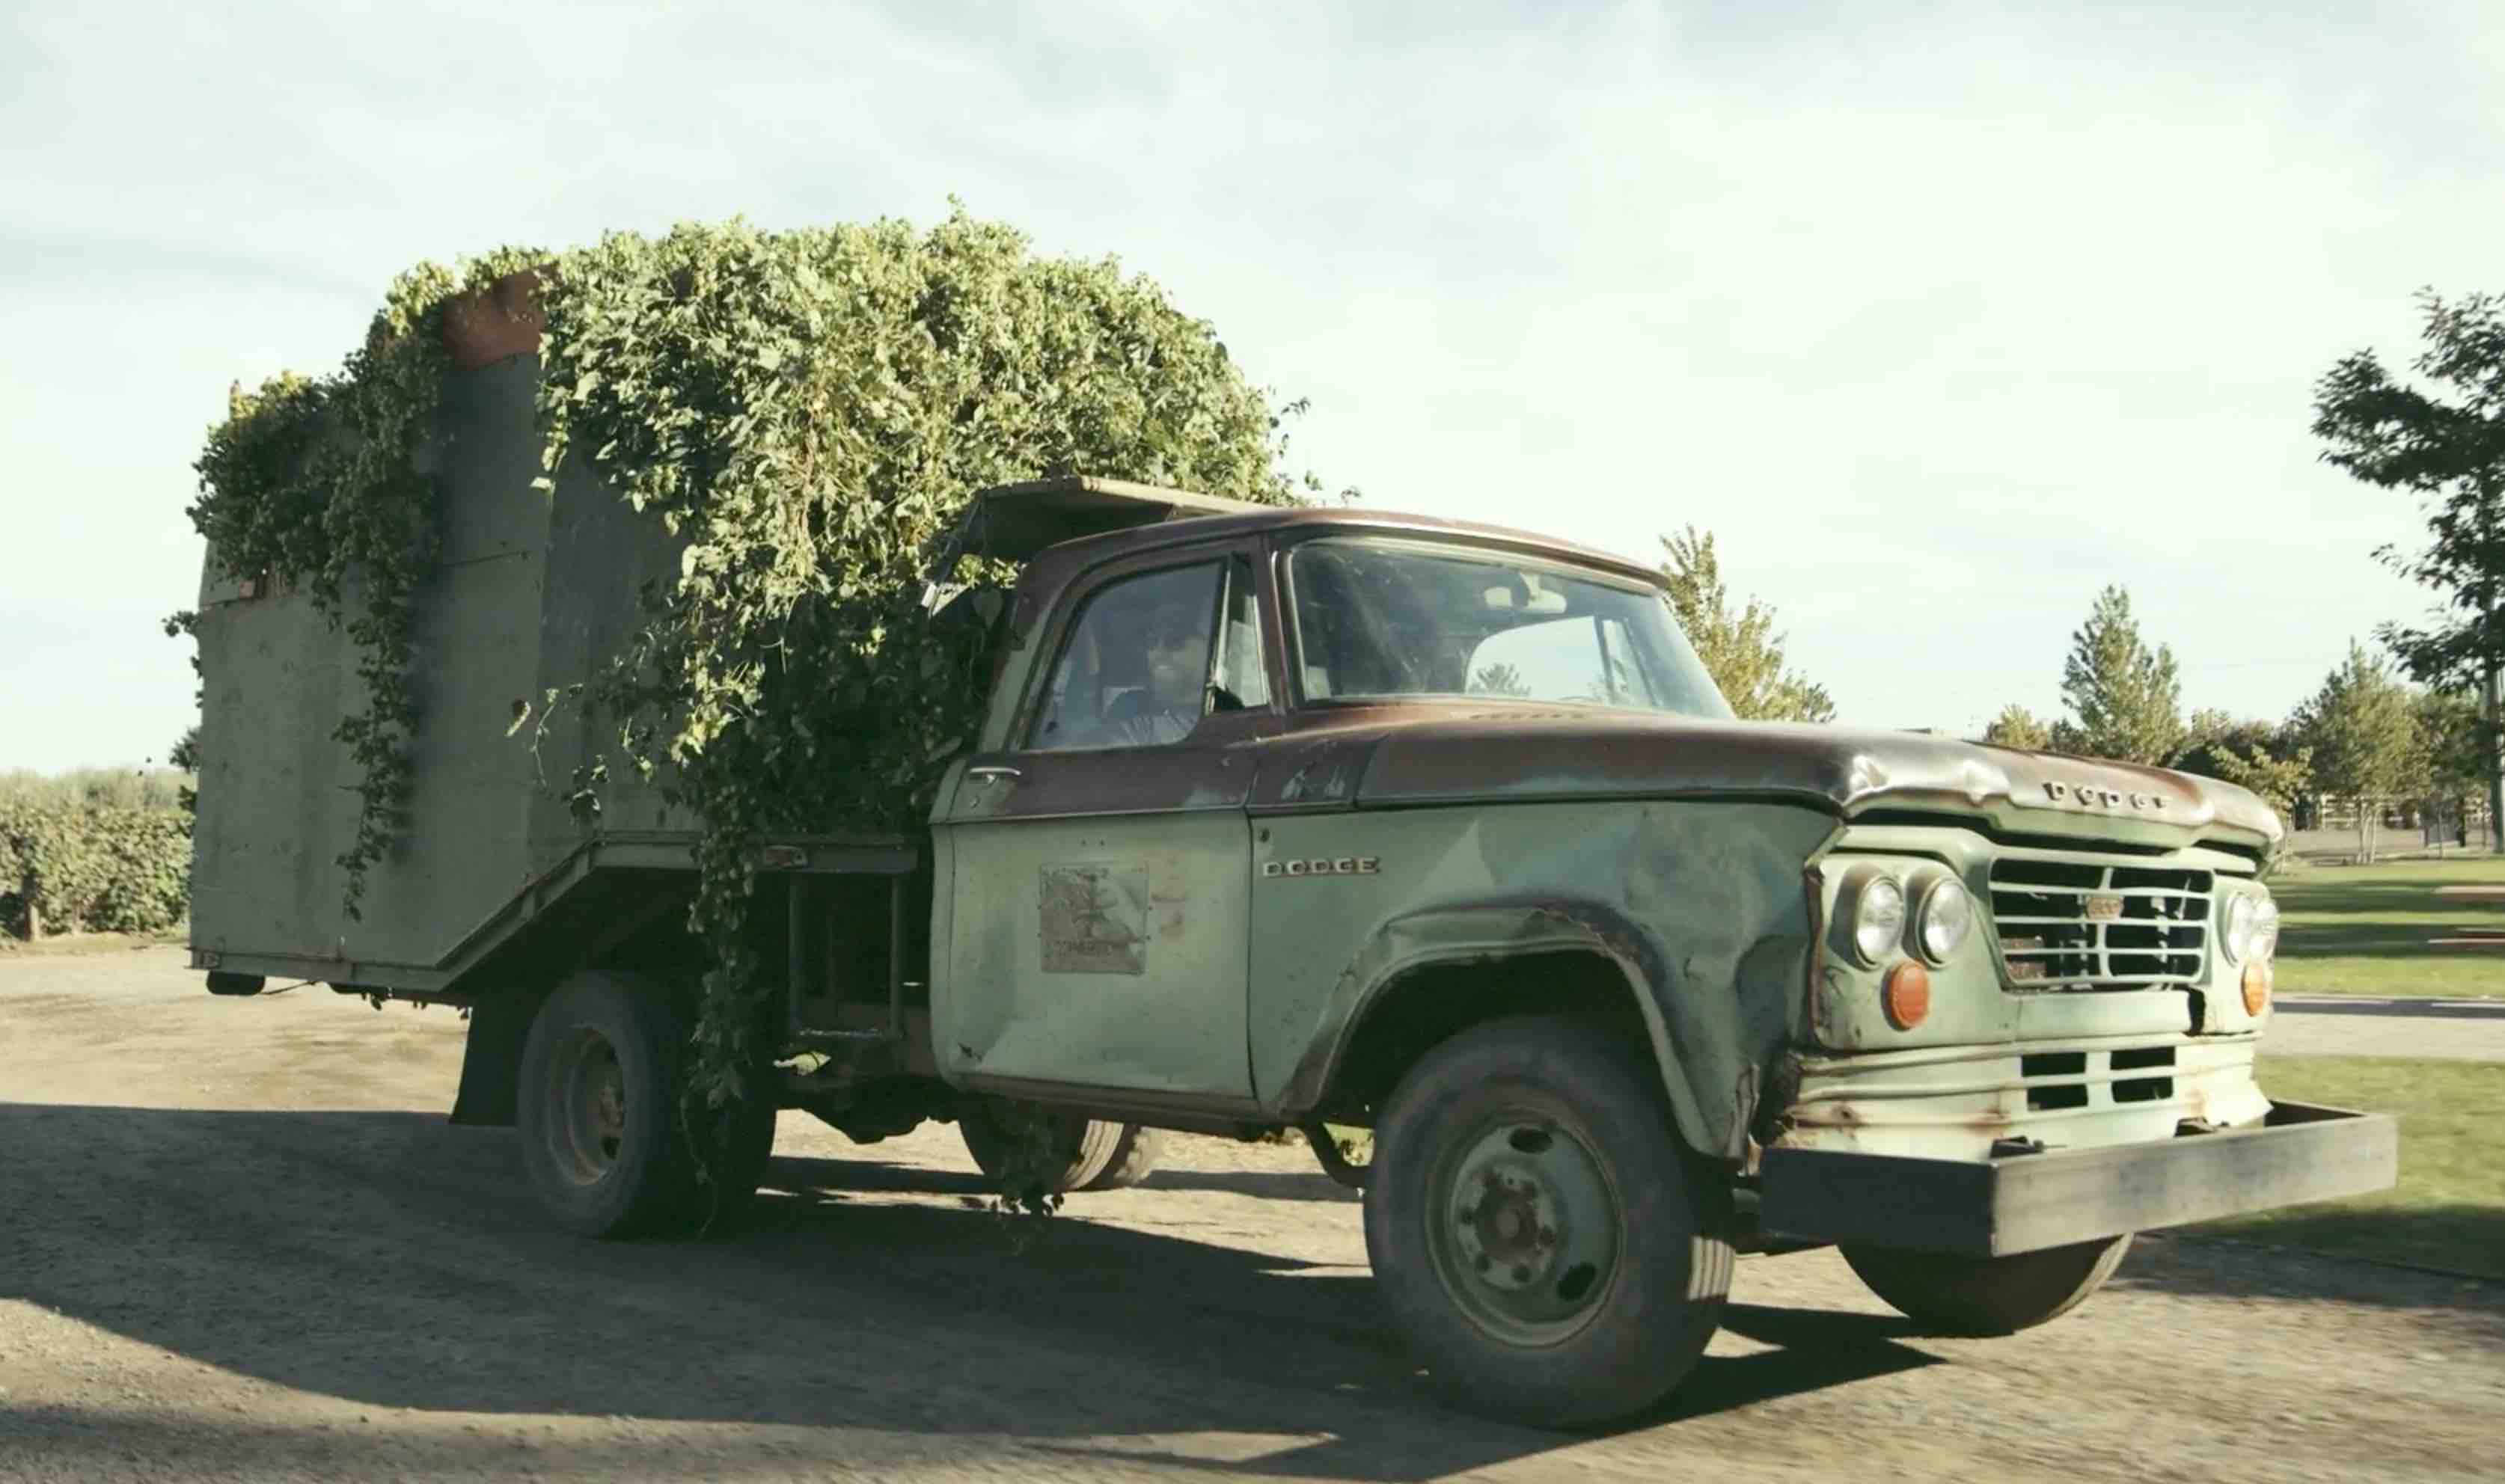 The hop harvest in Yakima Valley as seen in the new short film, Hop Dreams. (image courtesy of Firestone Walker Brewing)